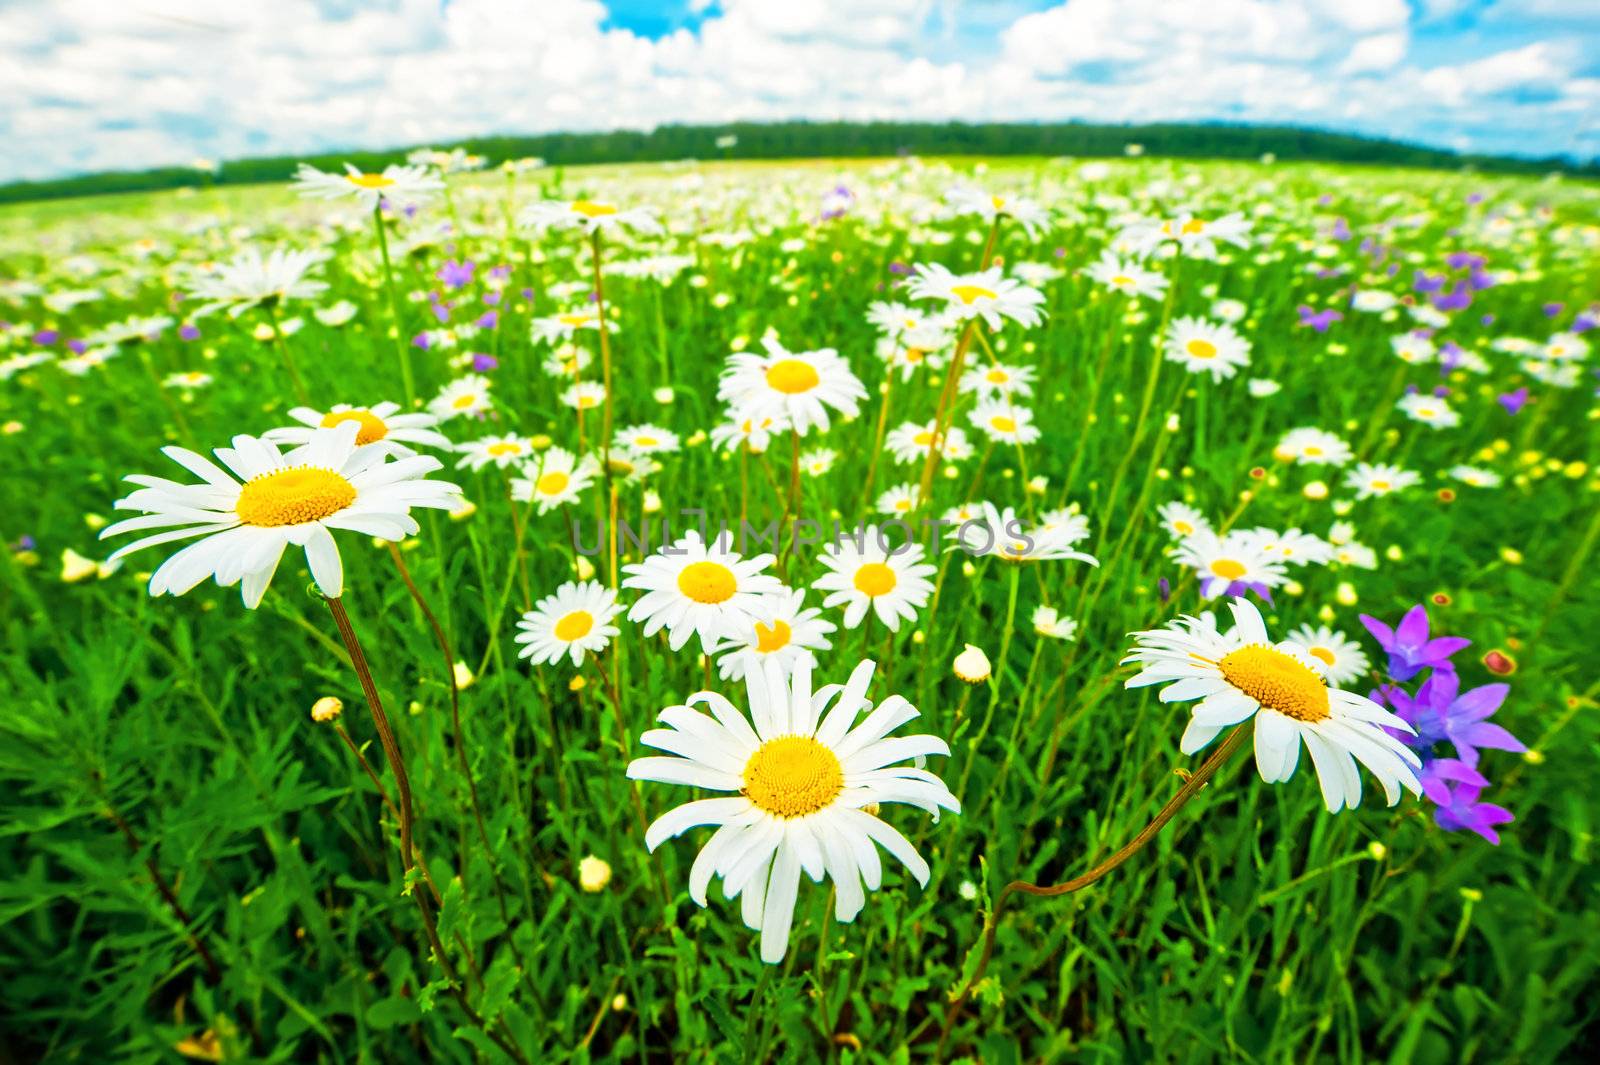 The meadow of daisies. by kosmsos111